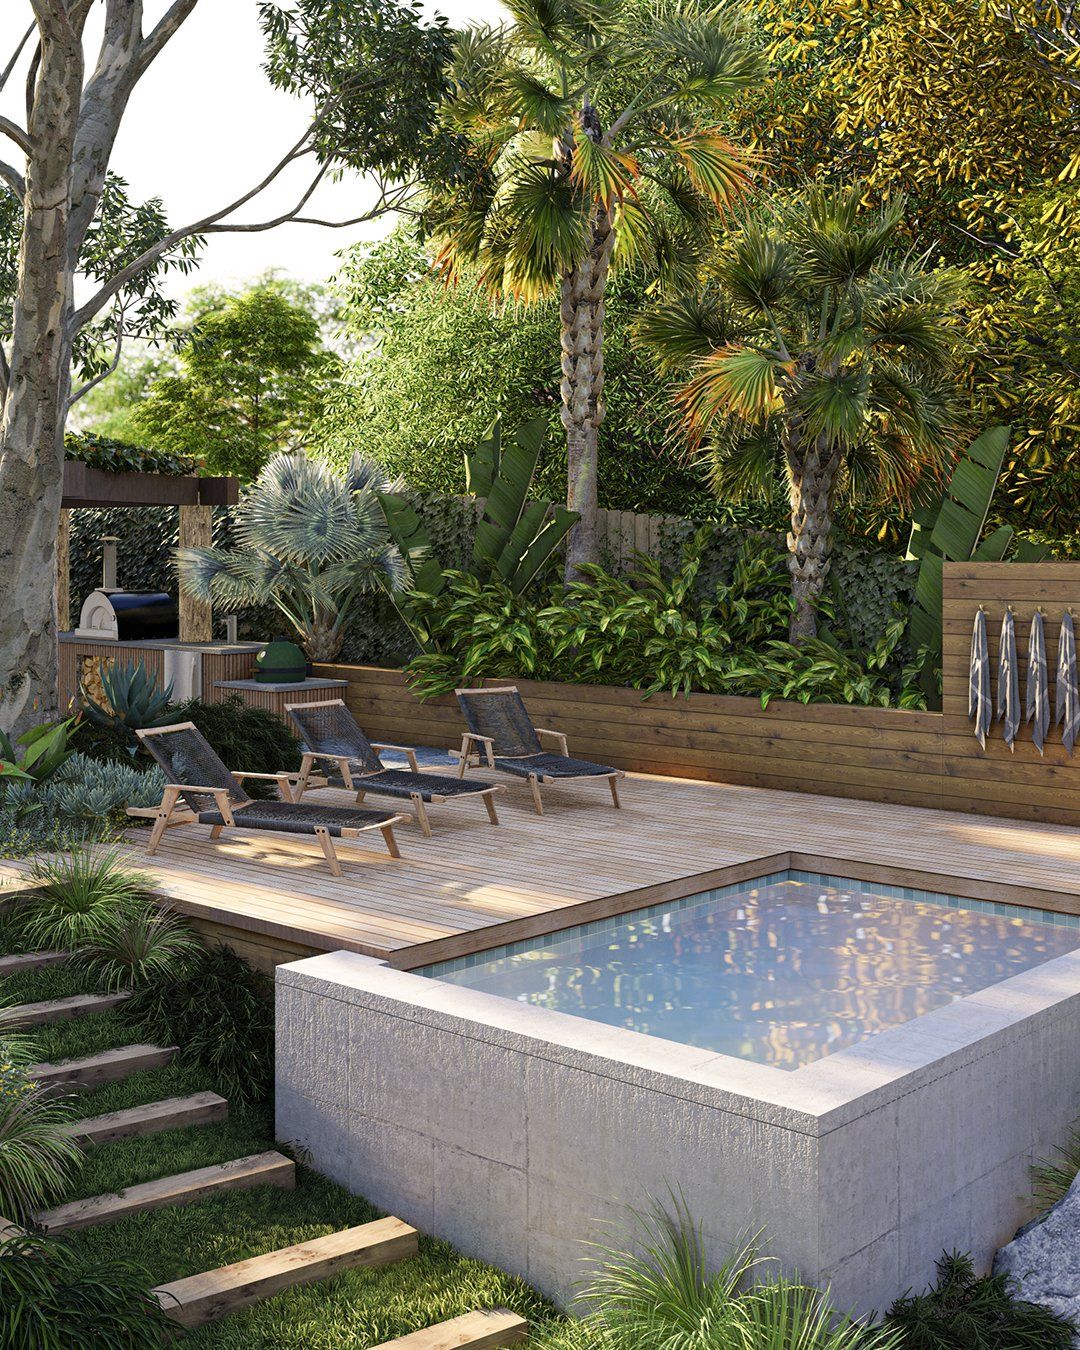 The Charm of Tiny Gardens with Pools: A Tranquil Oasis for Your Home